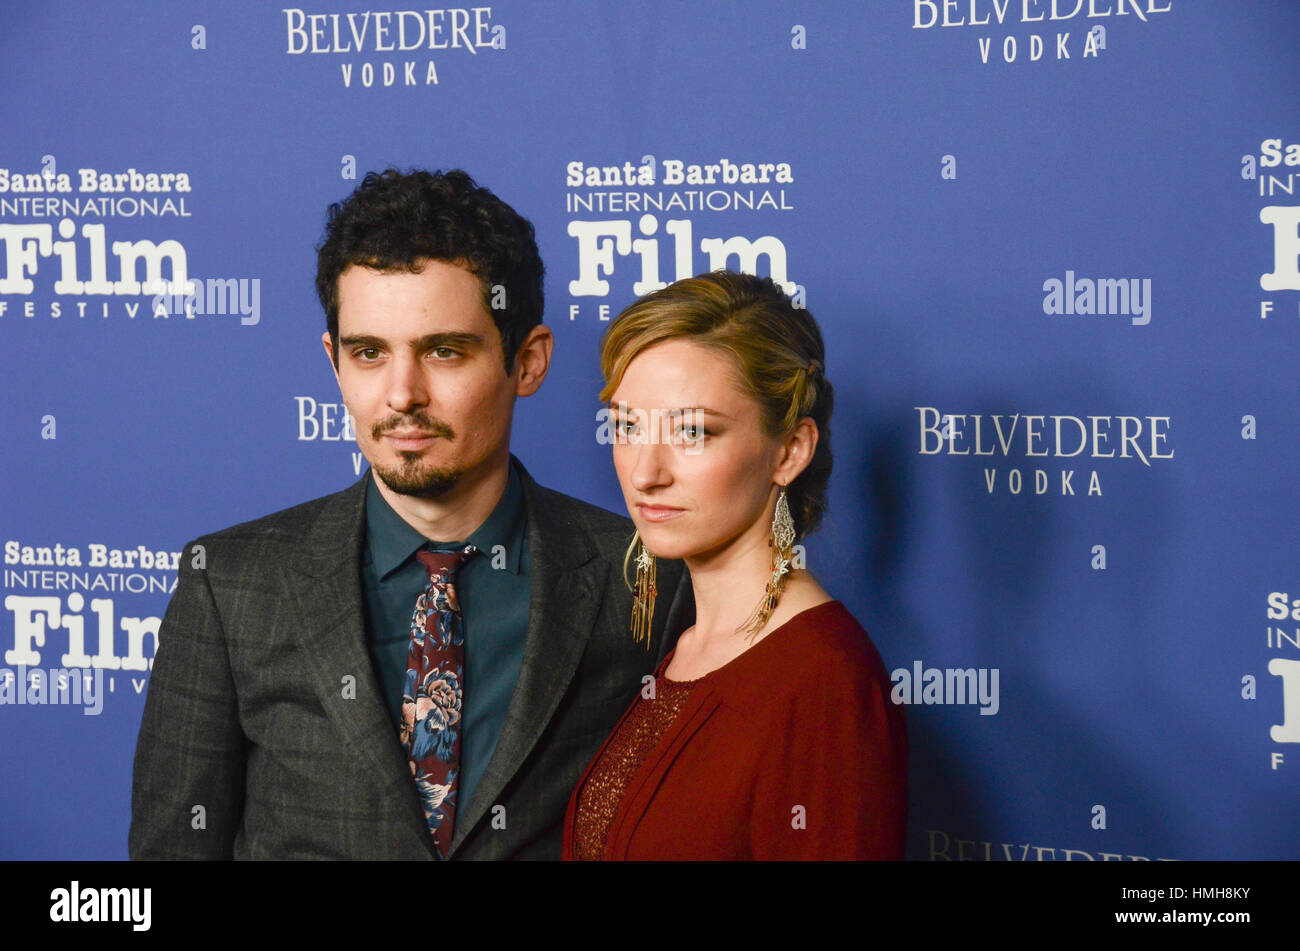 Santa Barbara, USA. 03rd Feb, 2017. Damien Chazelle and Olivia Hamilton attend the Outstanding Performing of the Year Award presented by Belevedere Vodka at the 32nd Annual Santa Barbara International Film Festival at the Arlington Theatre in Santa Barbar Stock Photo